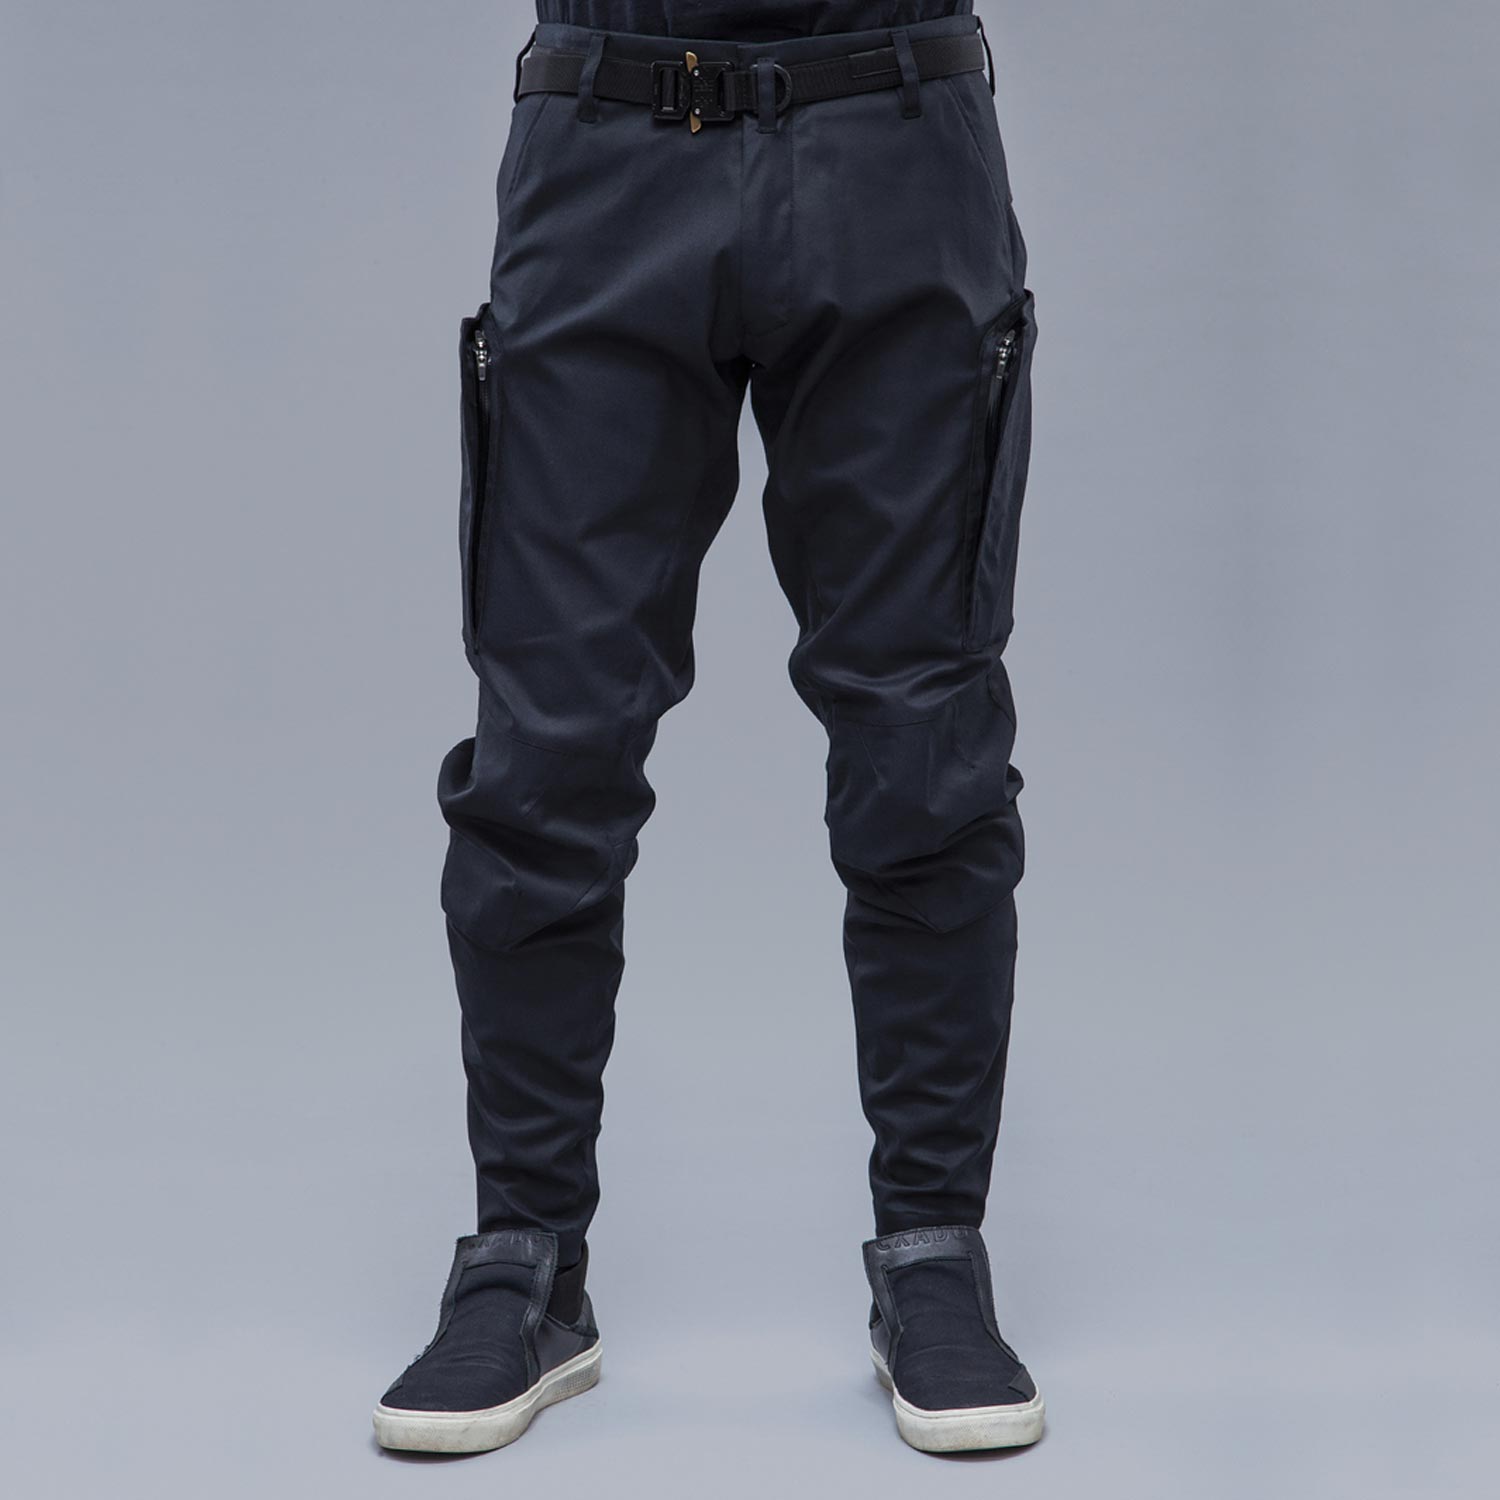 low rise slim bootcut jeans